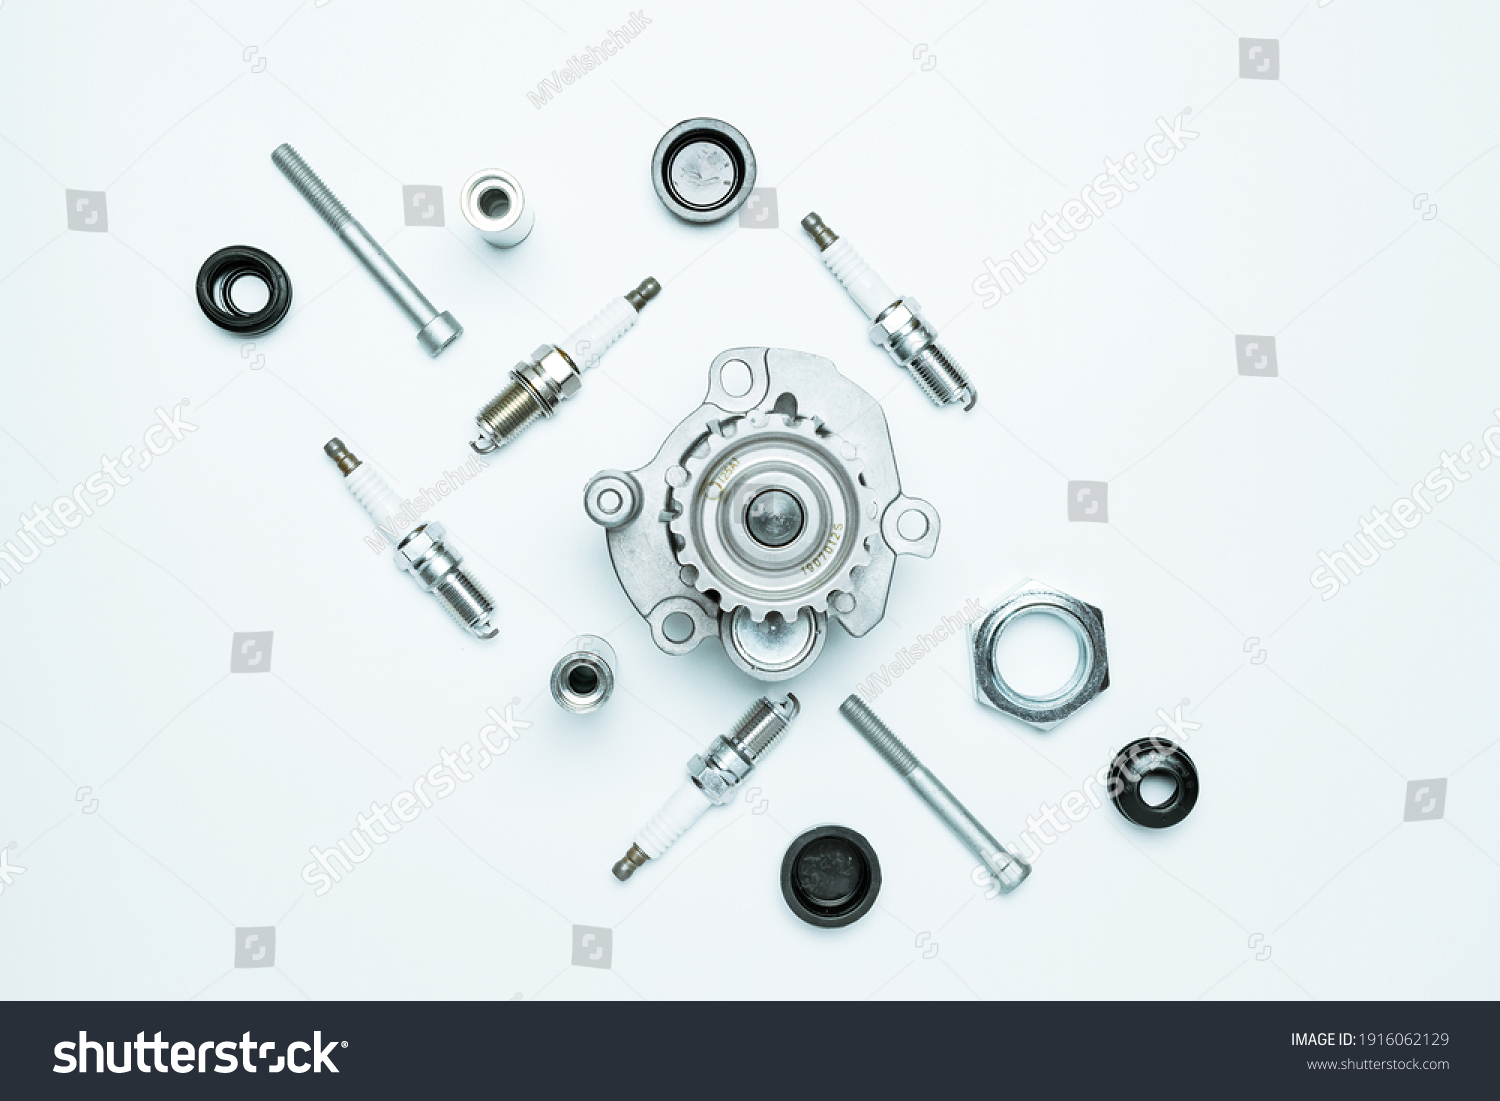 Car motor parts. Auto motor mechanic spare or automotive piece on white background. Set of new metal car part. Flat lay, top view, copy space #1916062129